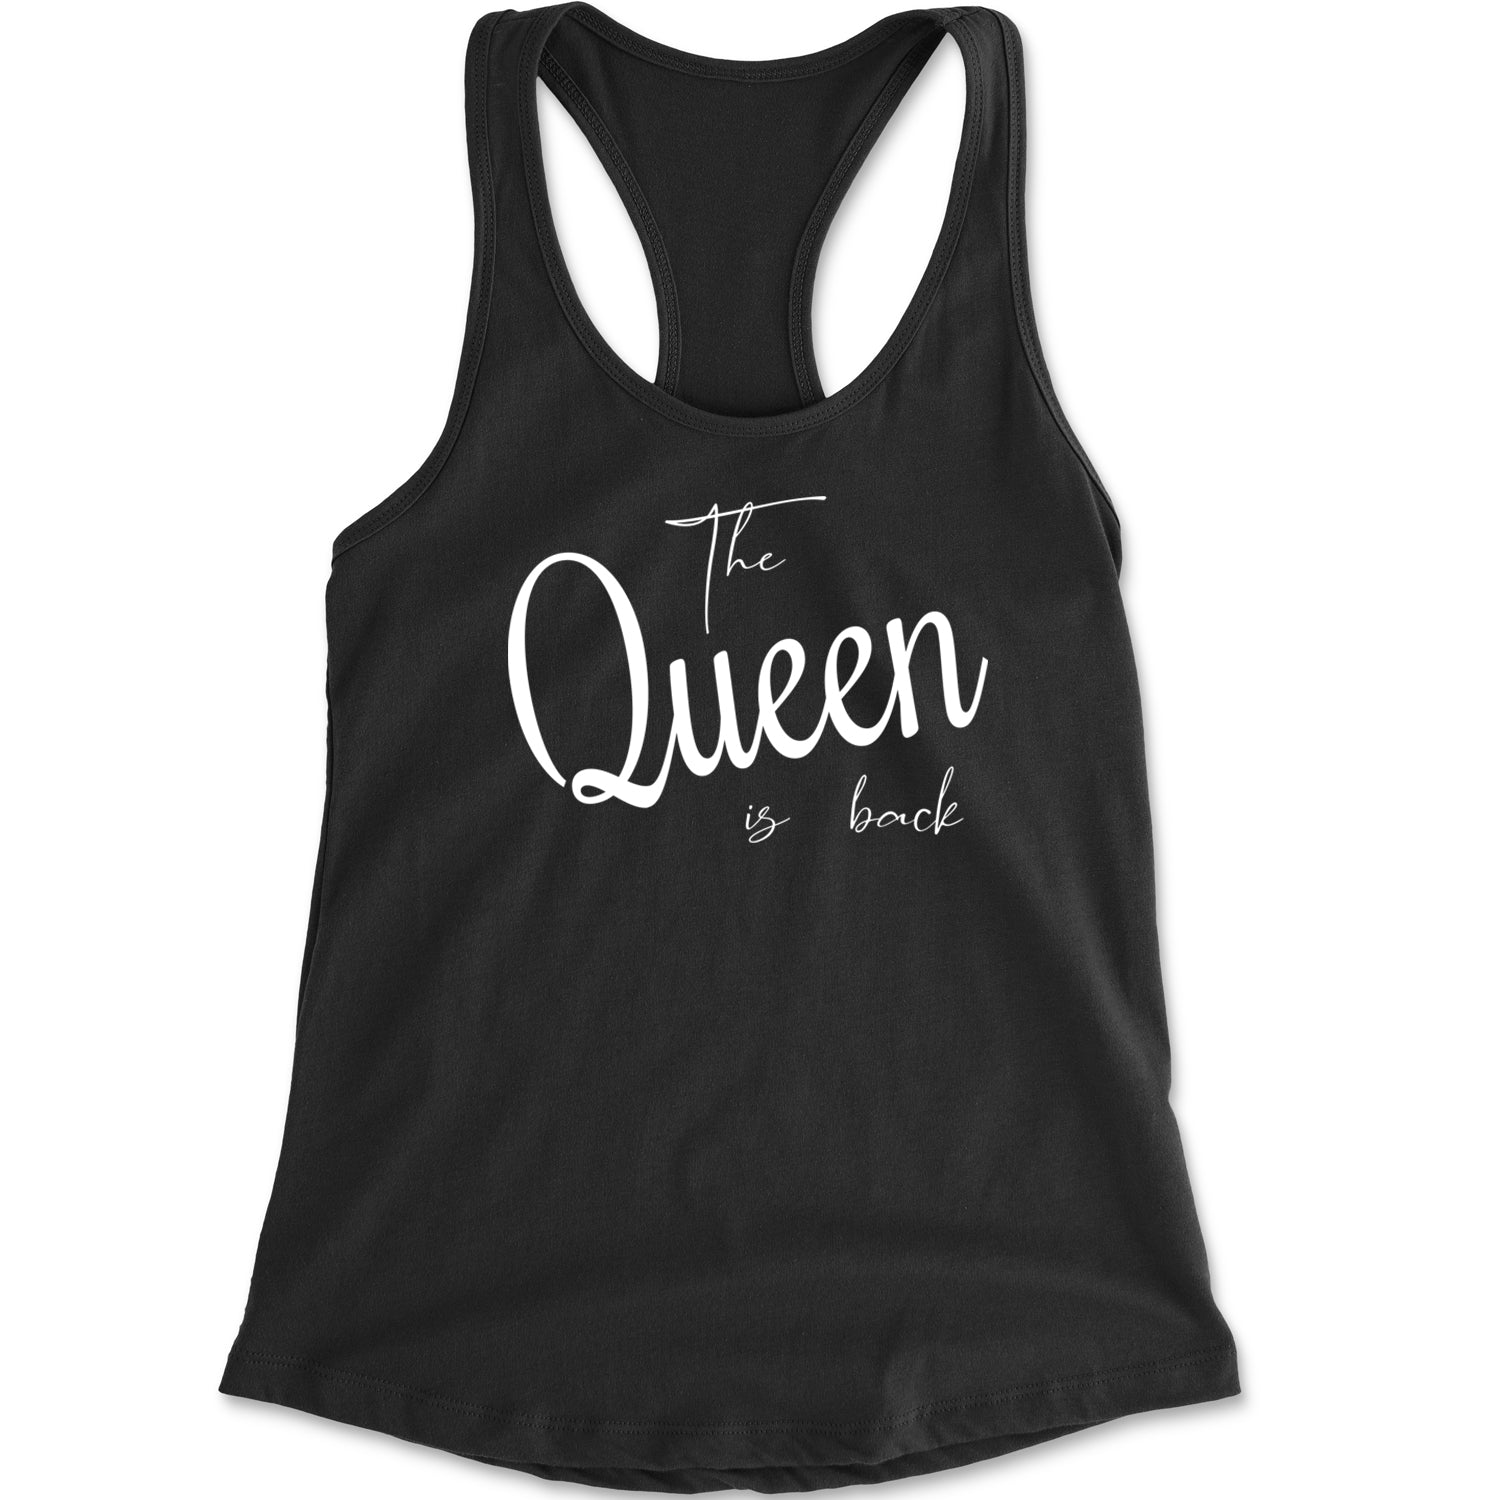 The Queen Is Back Celebration Racerback Tank Top for Women